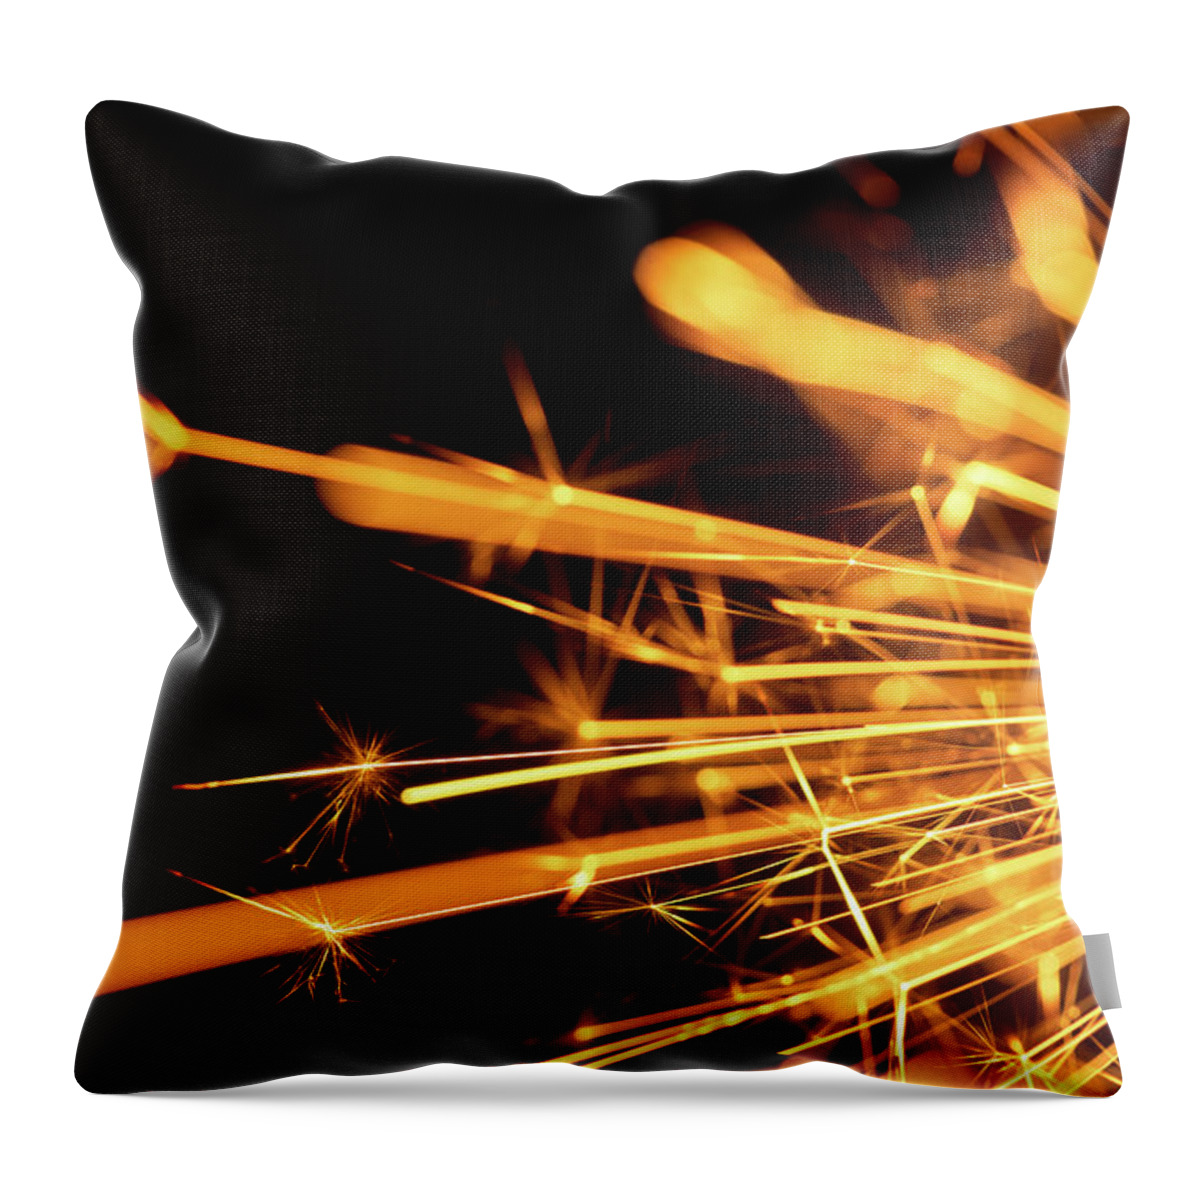 Funky Throw Pillow featuring the photograph Sparkler by Nikada